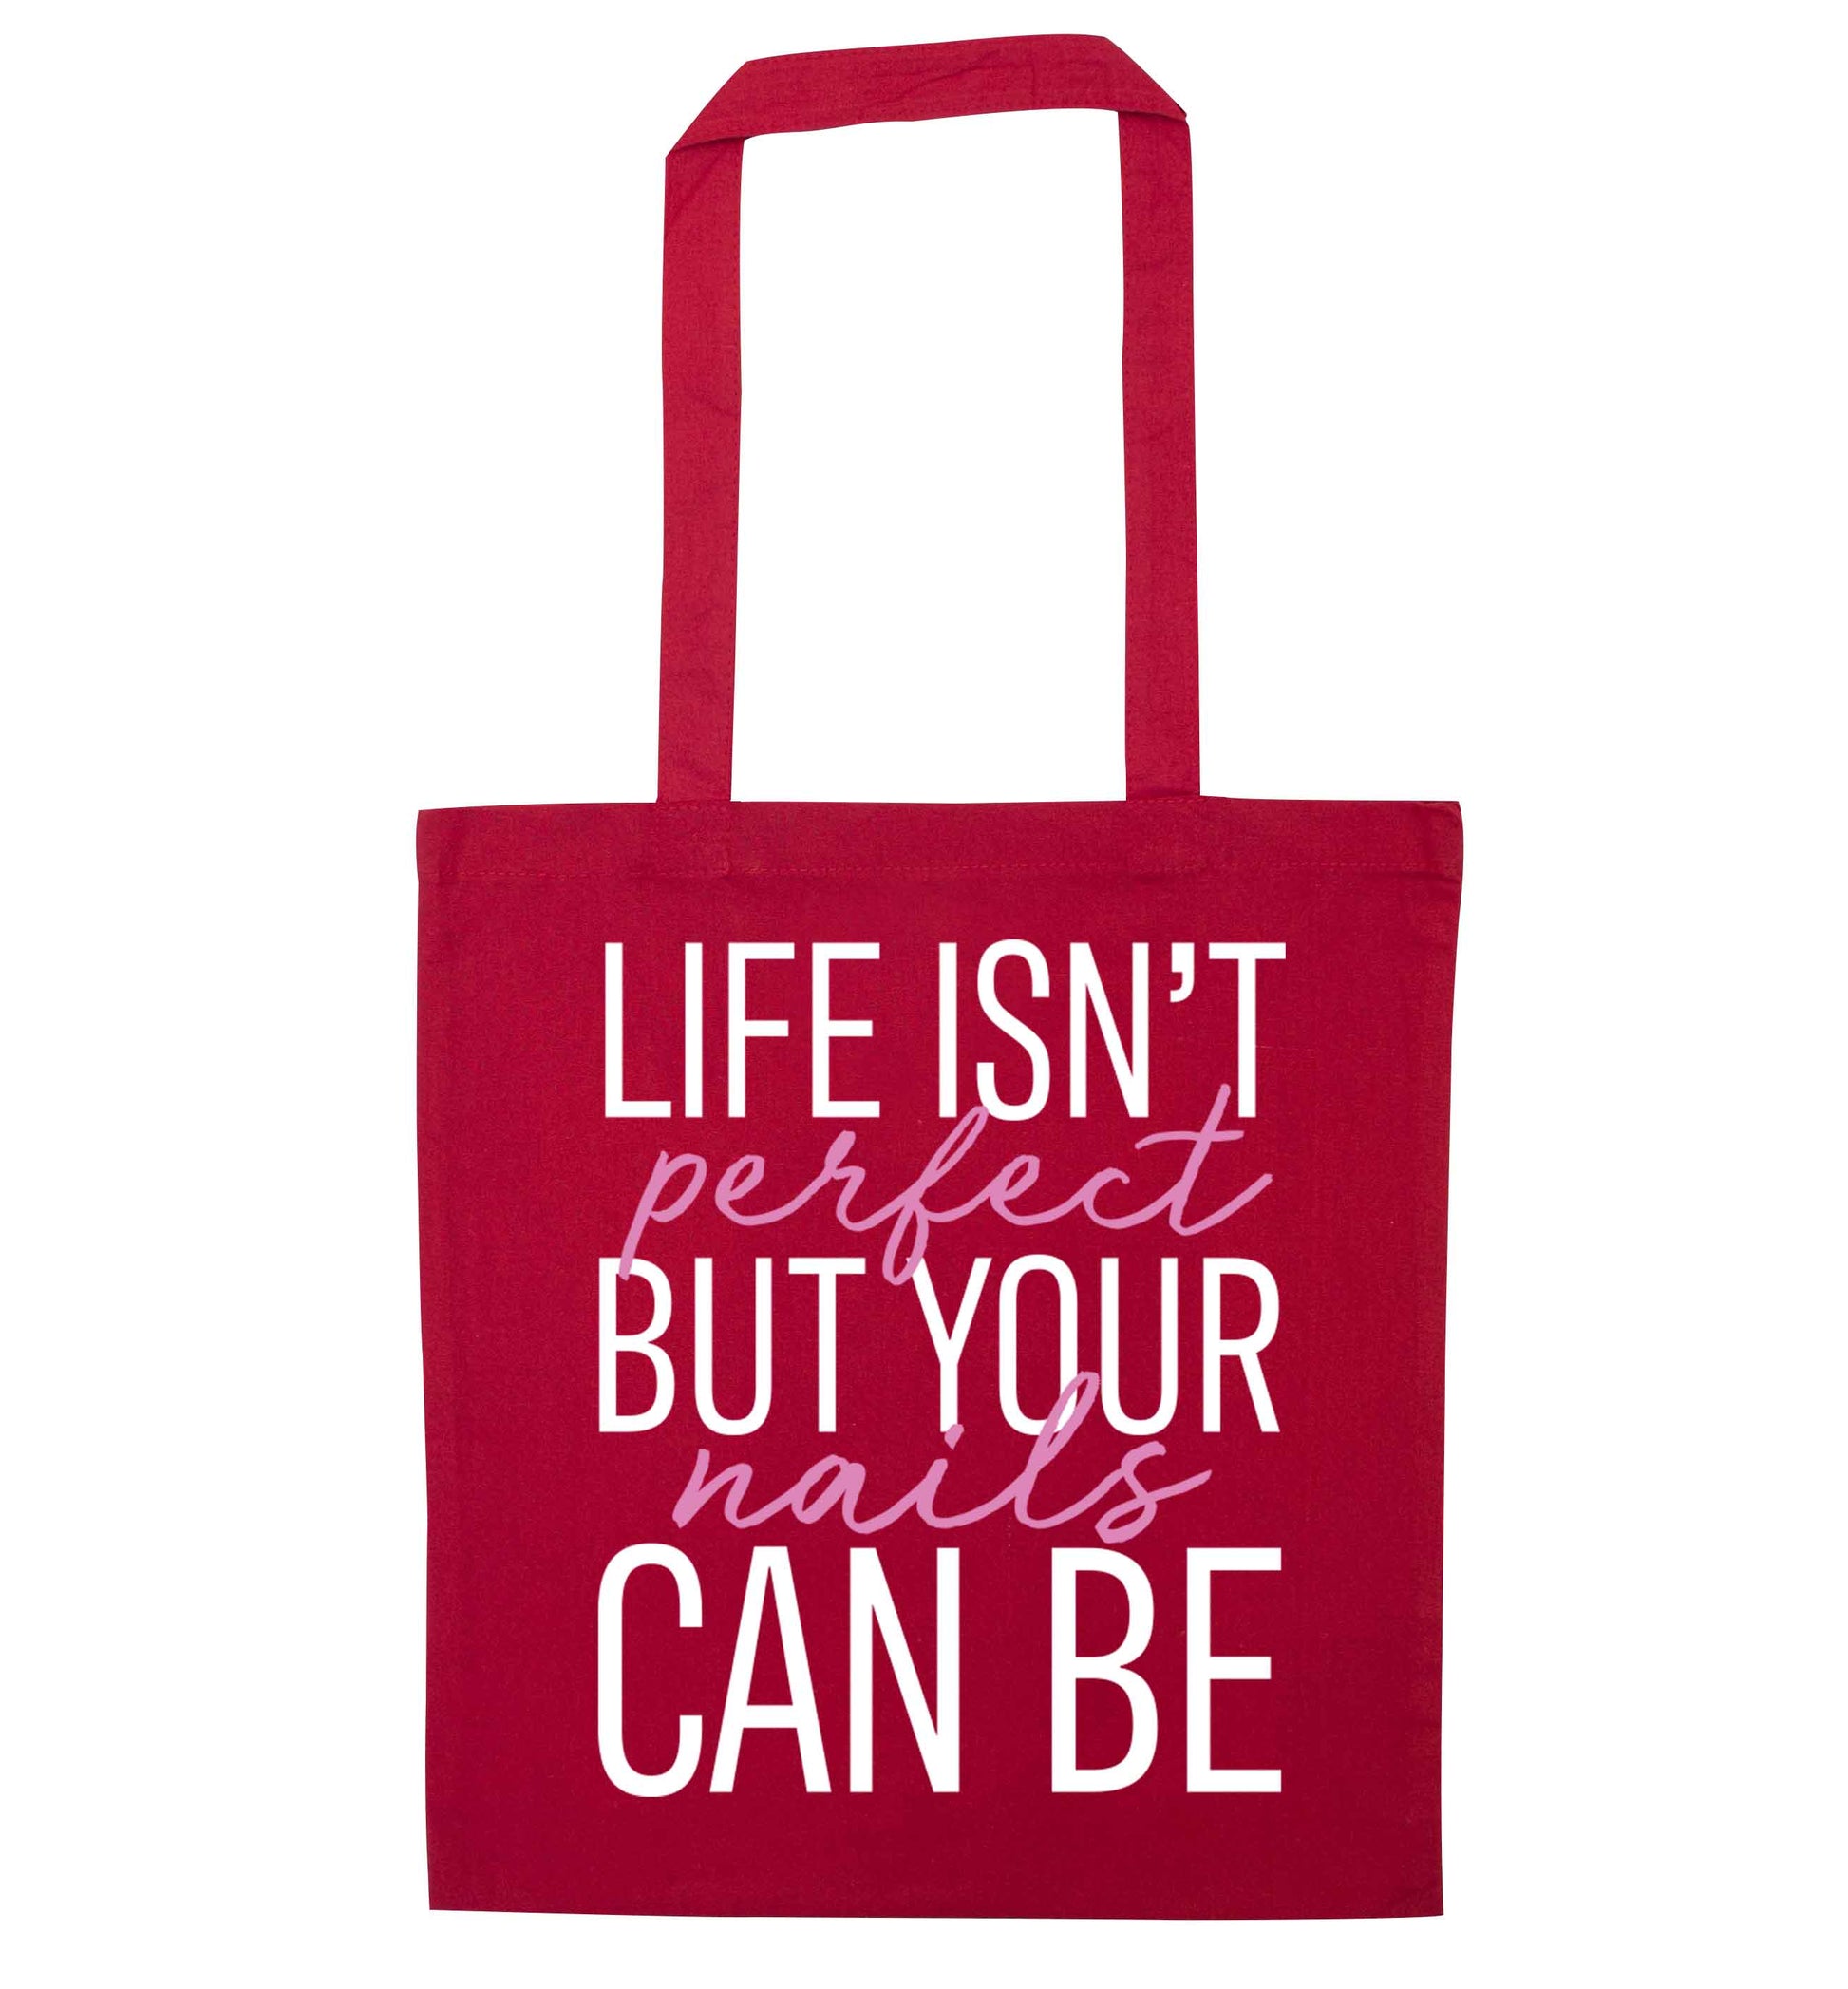 Life isn't perfect but your nails can be red tote bag